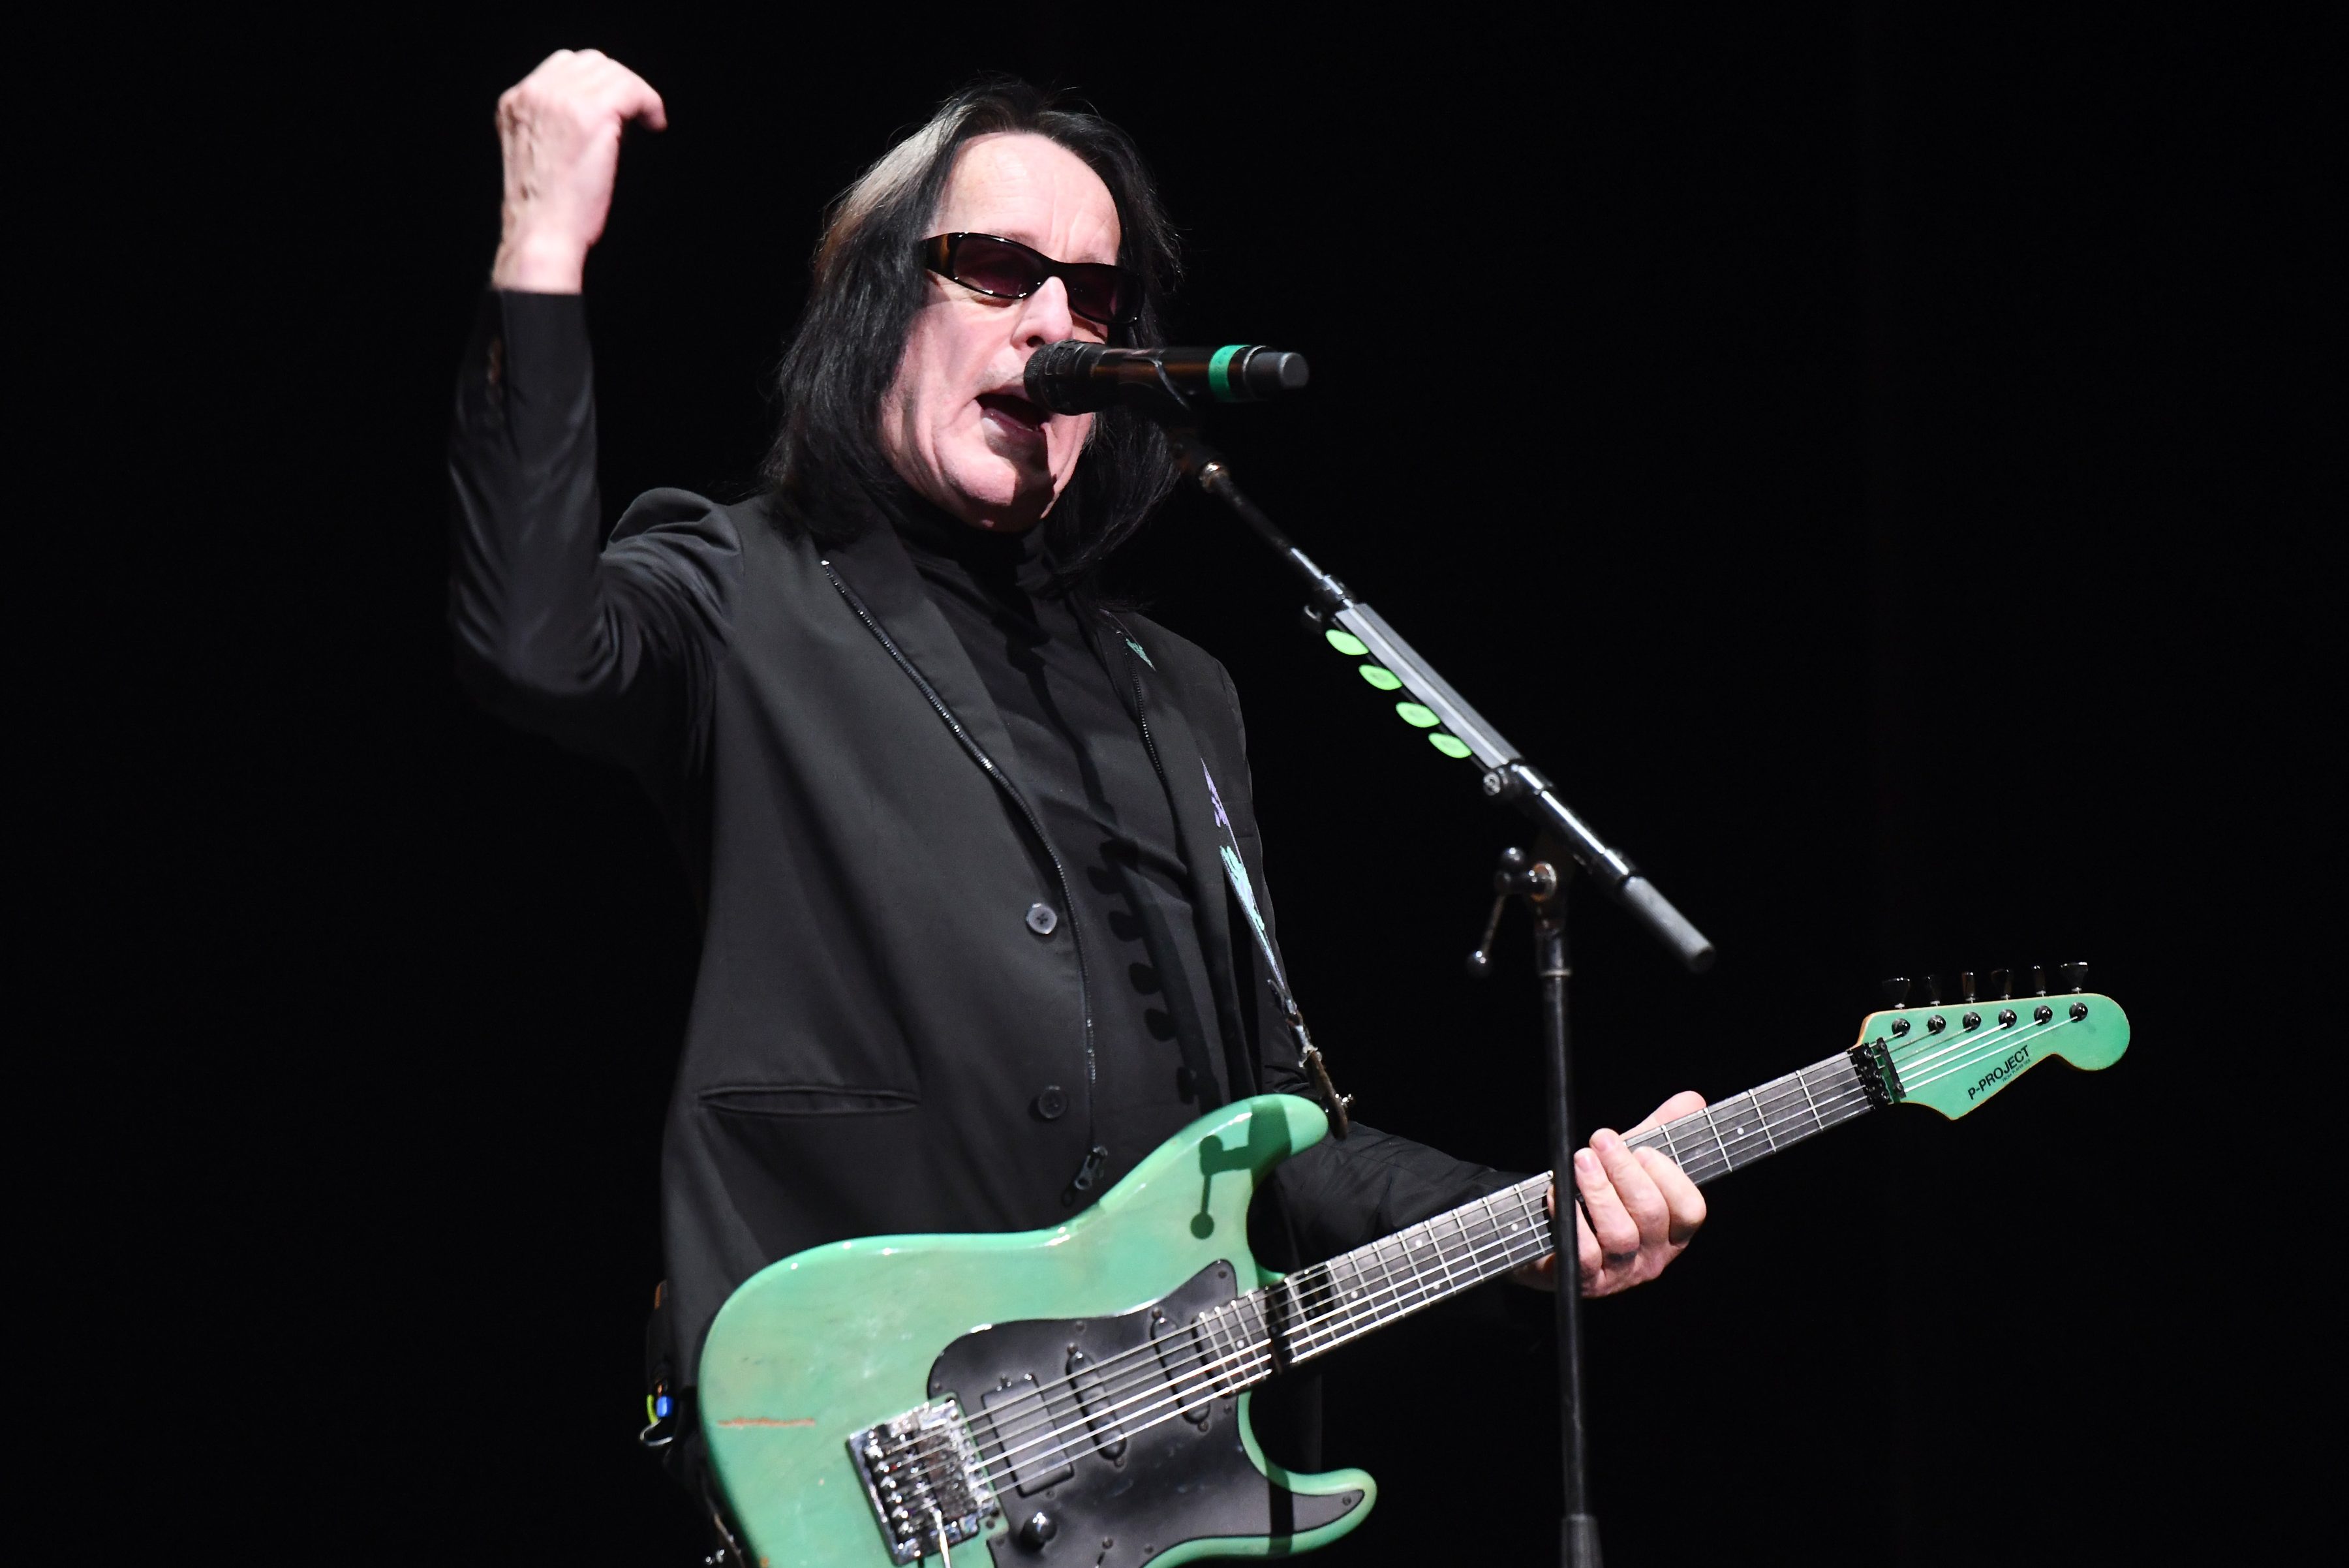 Todd Rundgren wearing sunglasses and holding a mint green guitar performs onstage during the 50th anniversary tribute tour celebrating The White Album at The Wiltern on December 11, 2019 in Los Angeles, California